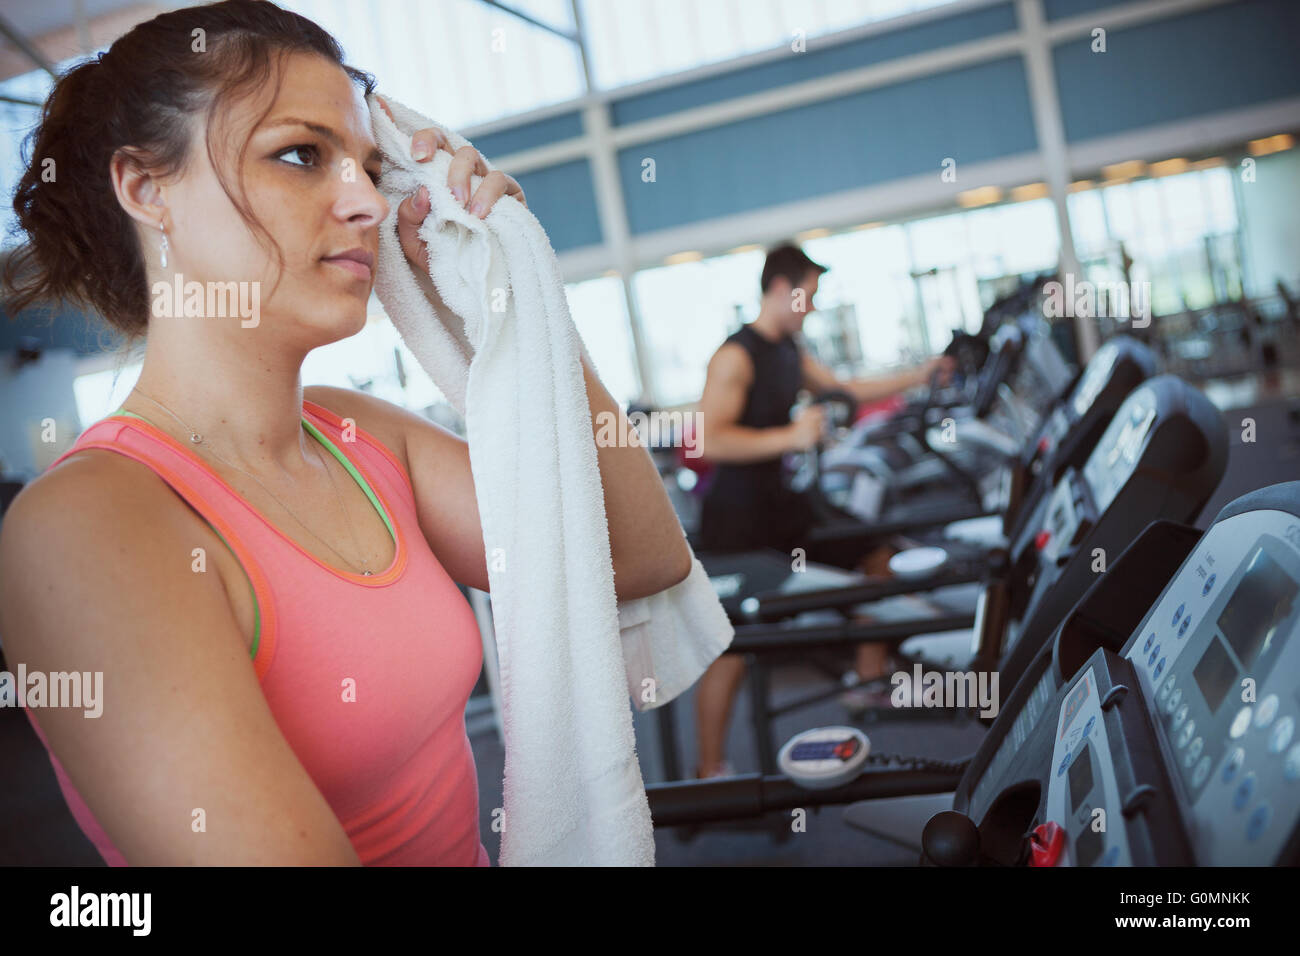 Series with man and woman at the gym, lifting weights, using the treadmill, etc. Stock Photo